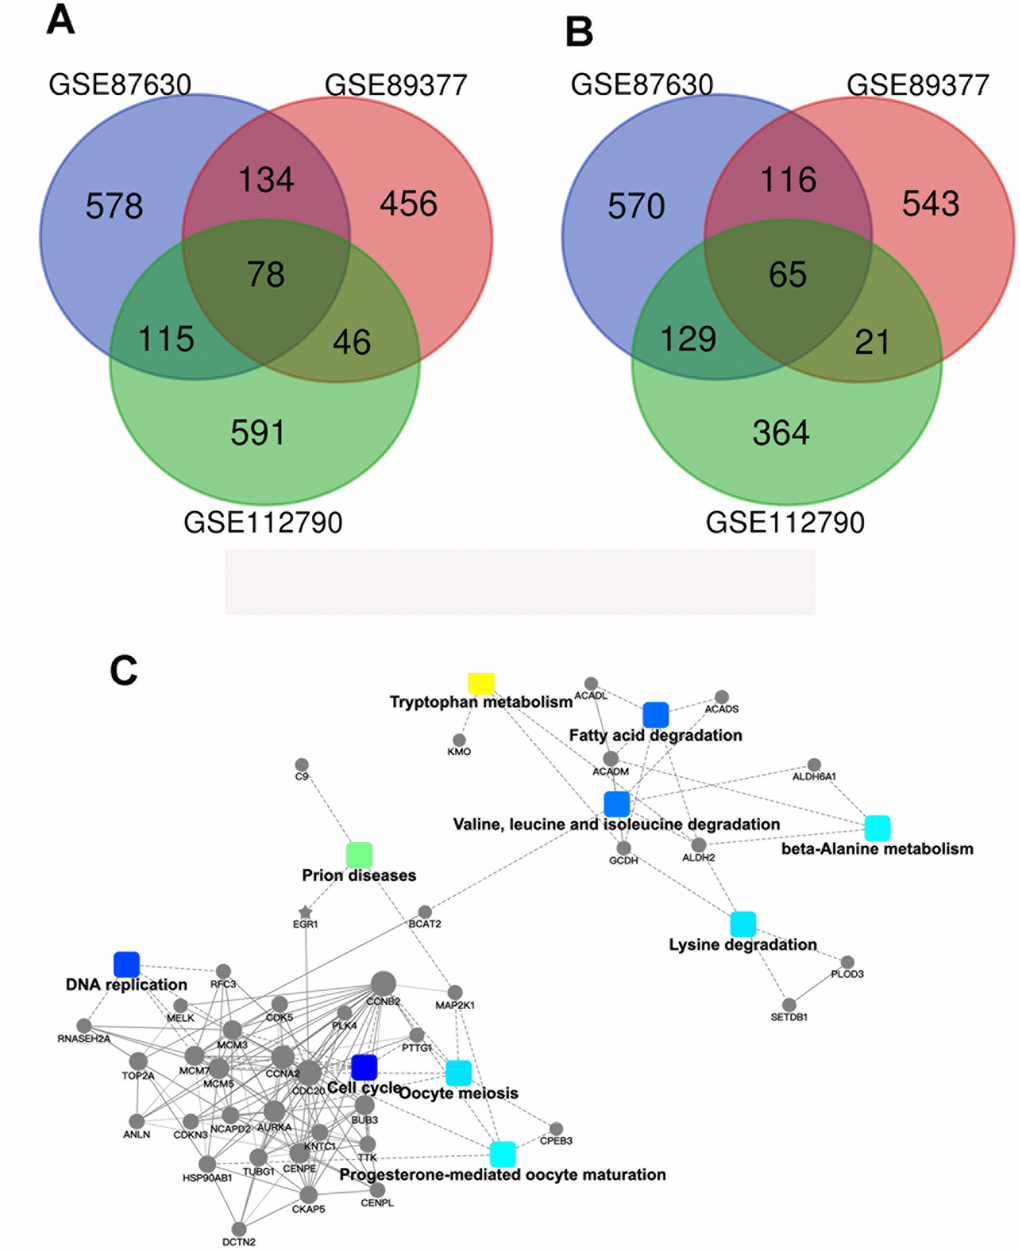 Identification of the genes which show differential expression patterns in HCC. (A) A Venn diagram of the common DEGs associated with GSE87630, GSE89377, and GSE112790. (B) Protein–protein interaction networks which are associated with the differentially expressed genes.